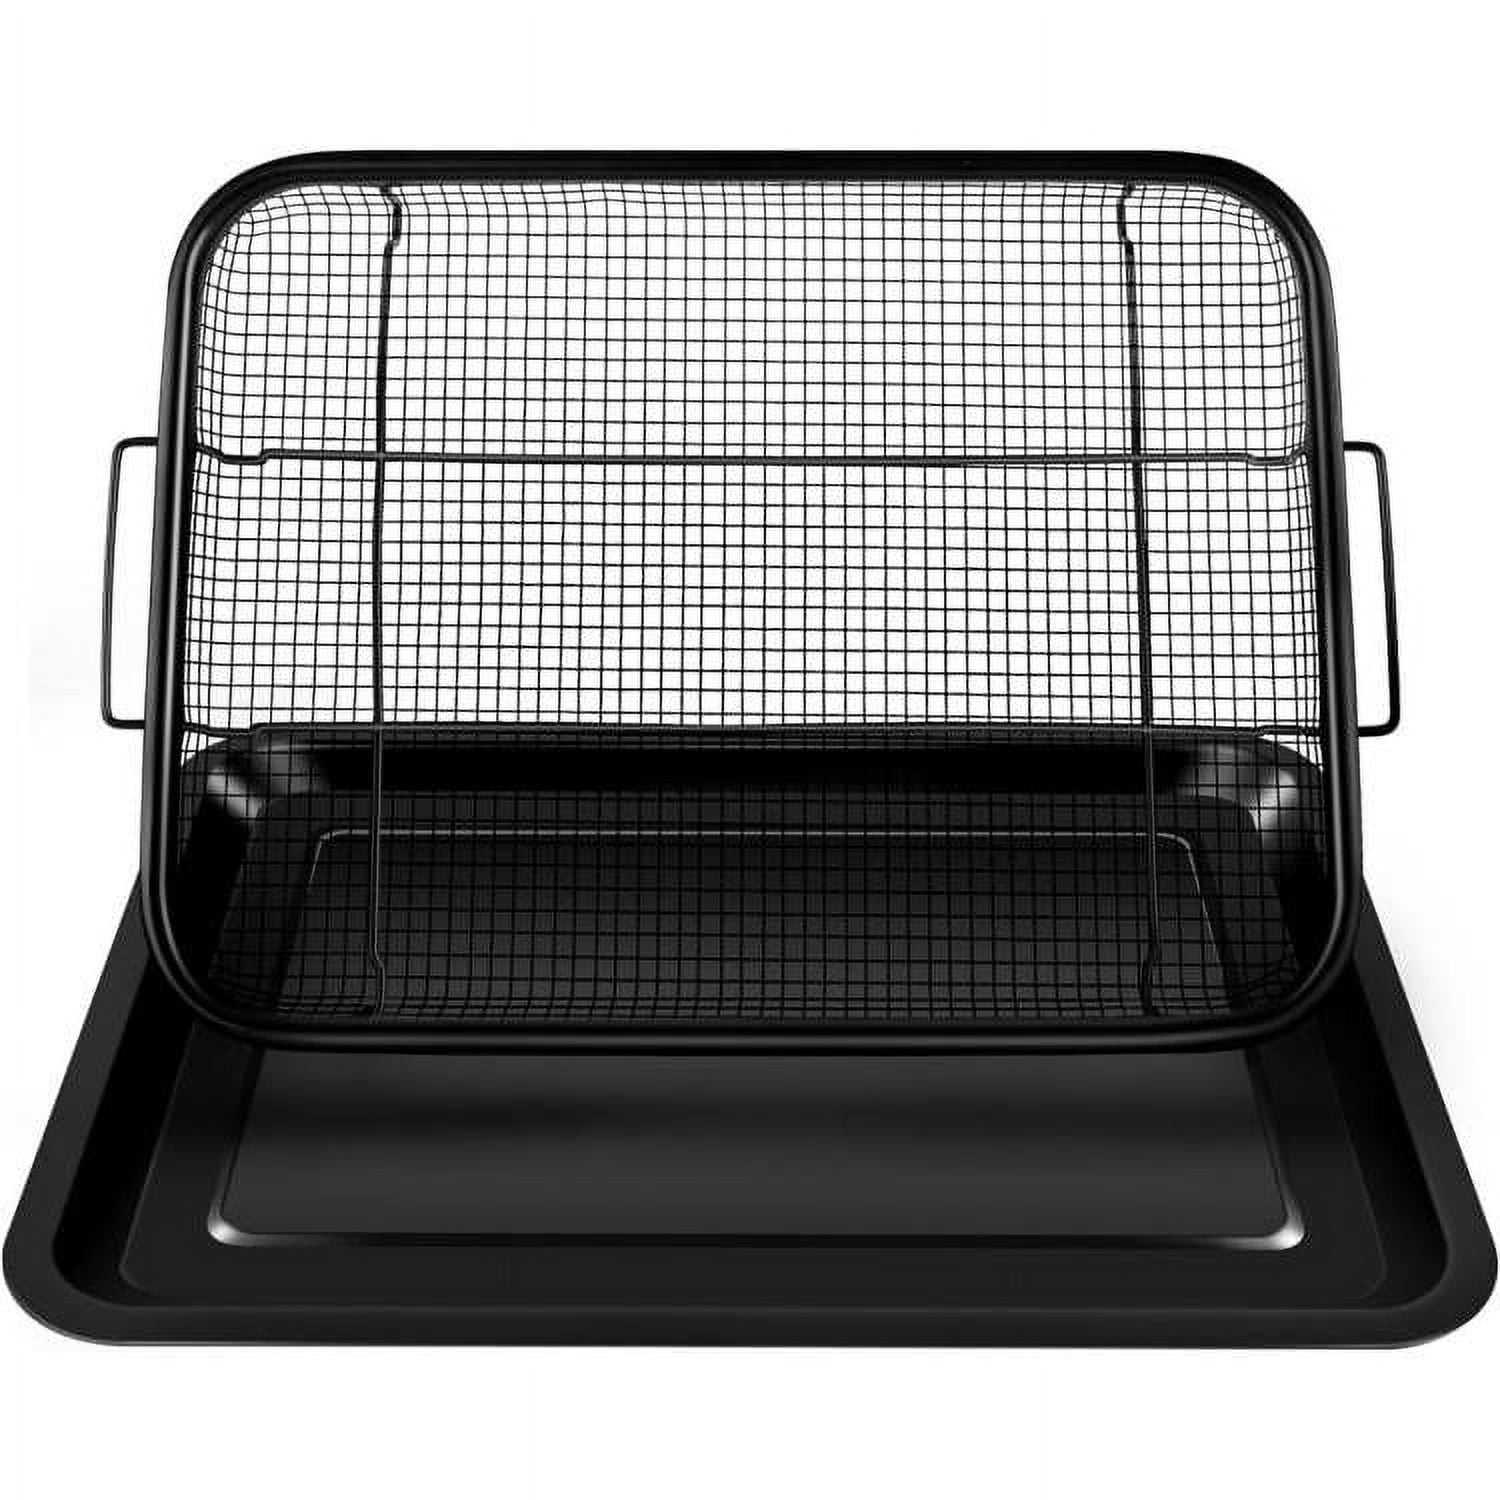 Air Fryer Basket for Oven 13 x 11 x 3